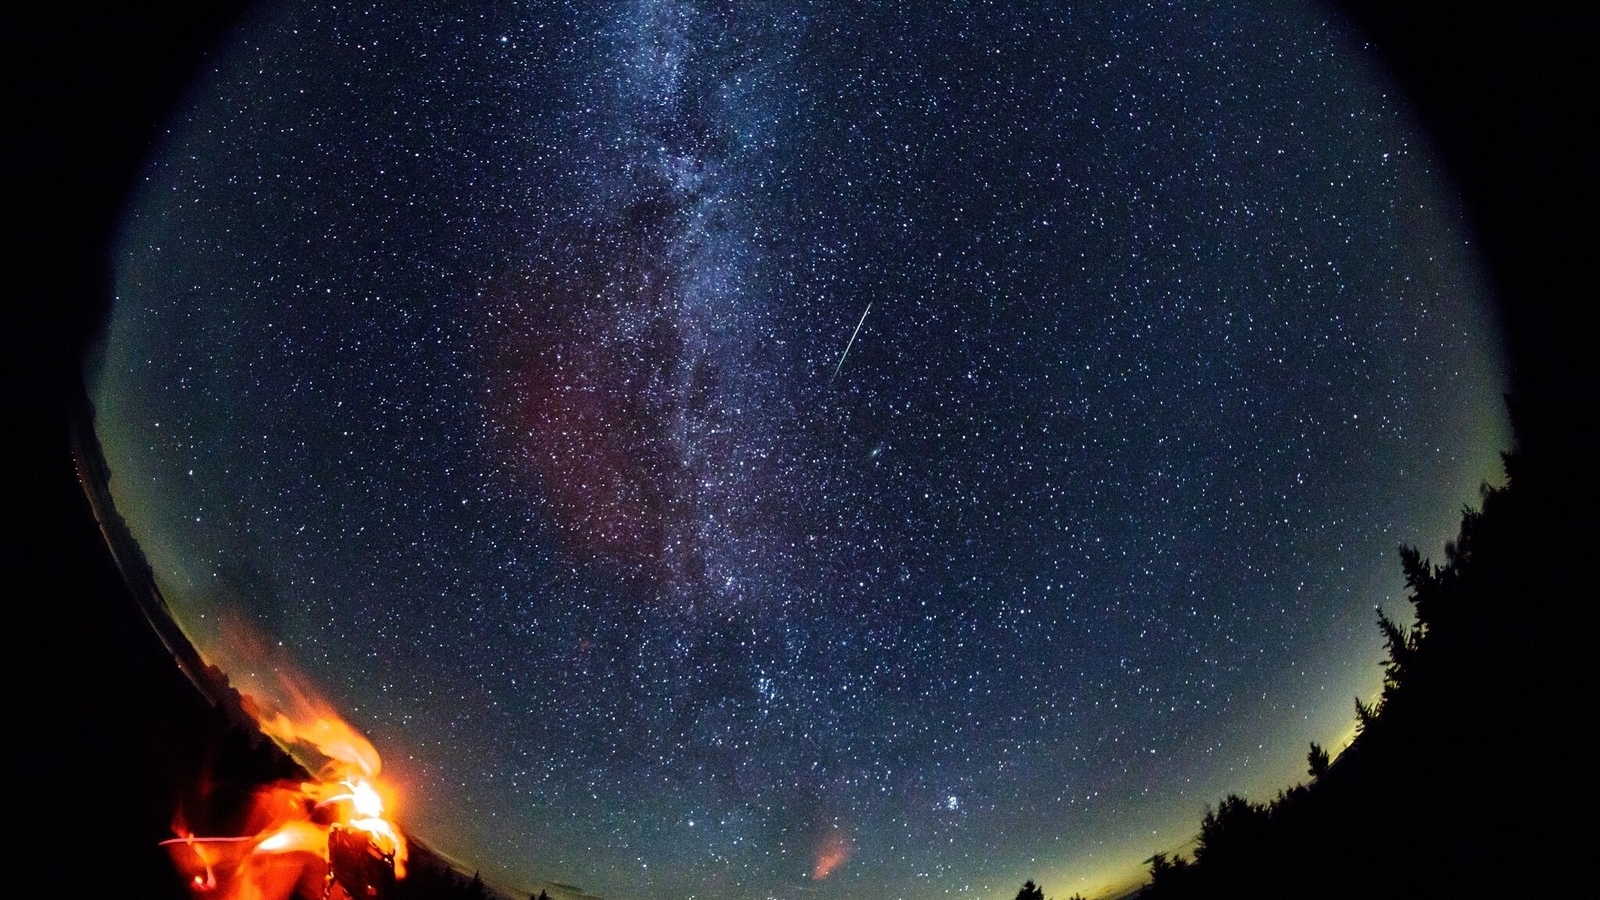 Perseids meteor shower to light up night skies in August. When and how